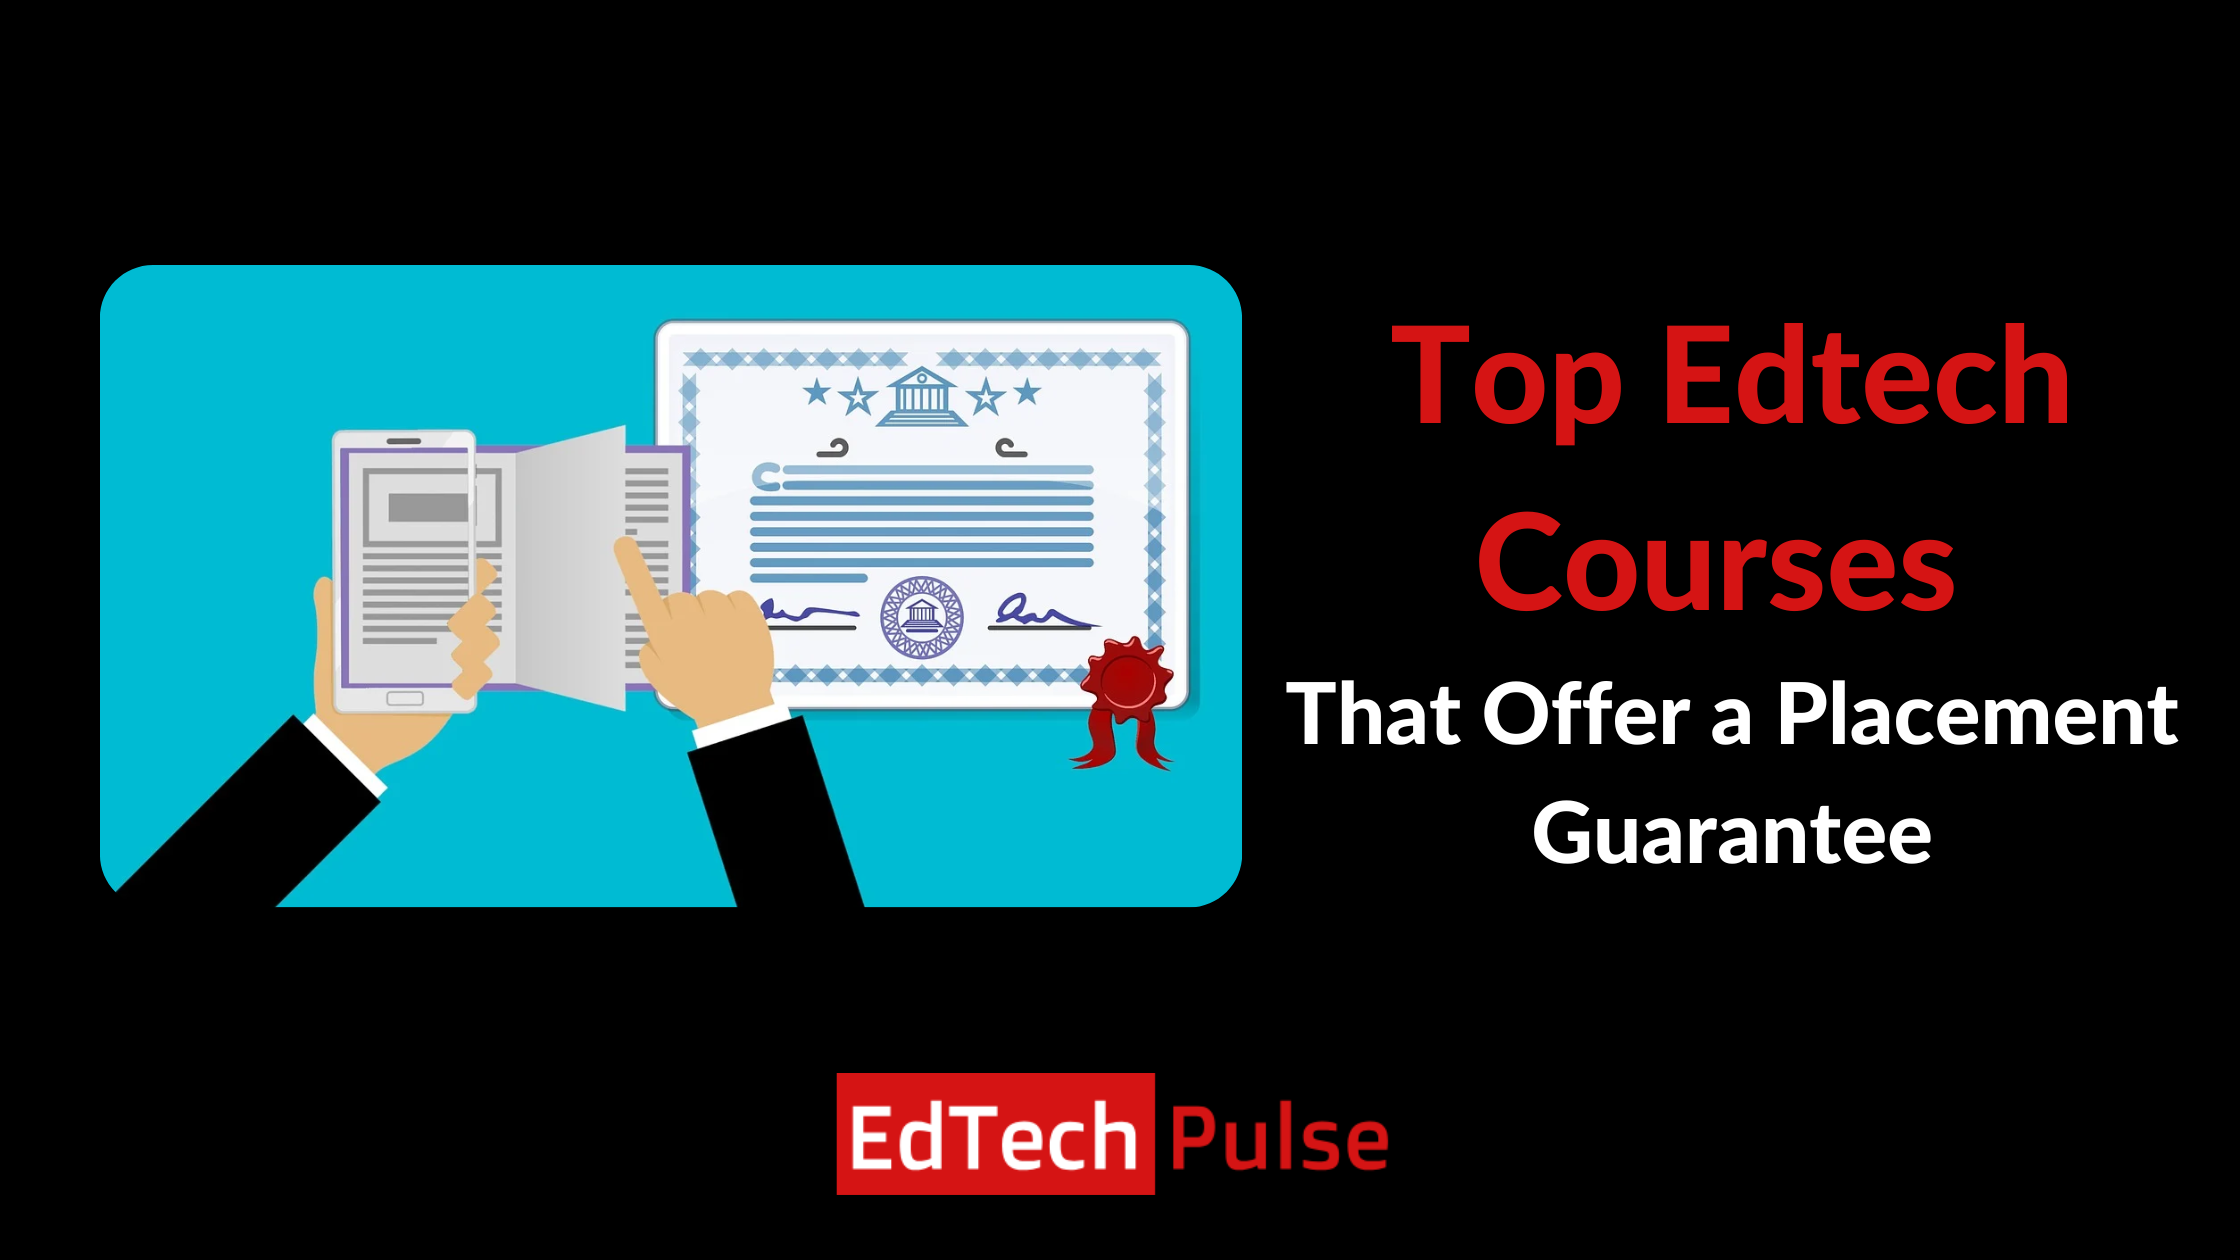 Top Edtech Courses That Offer a Placement Guarantee